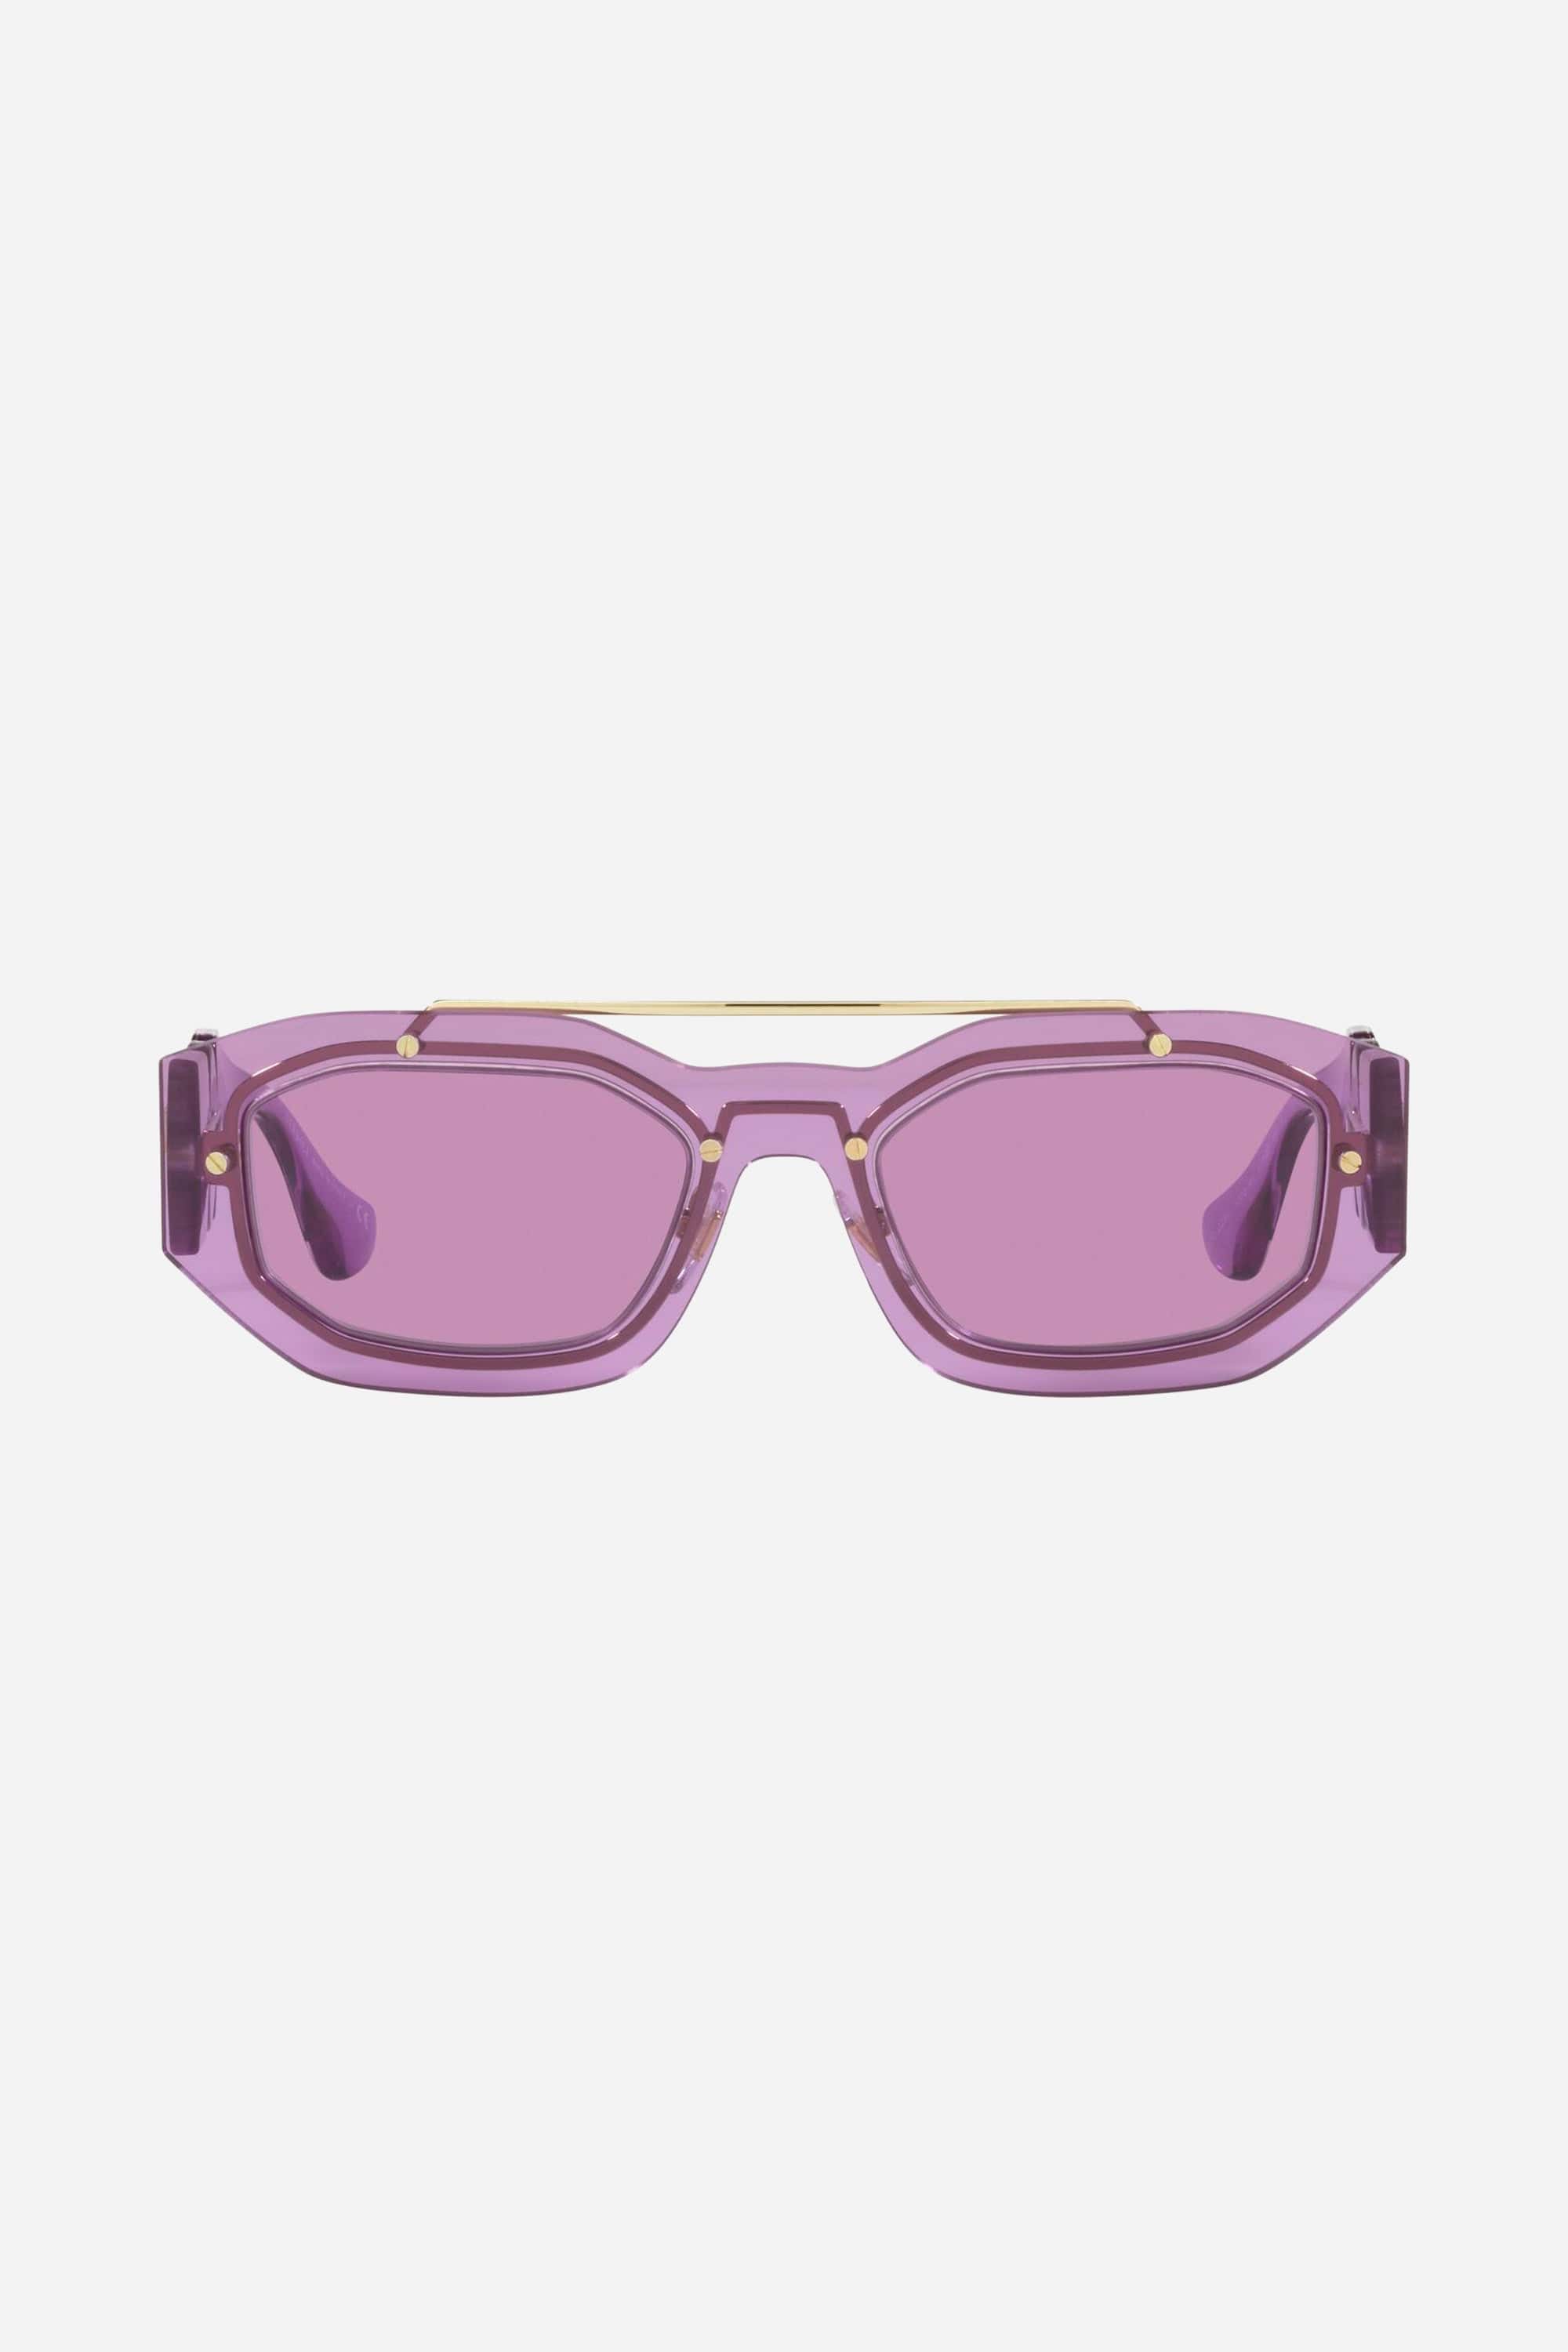 Versace sunglasses in violet with iconic jellyfish - Eyewear Club